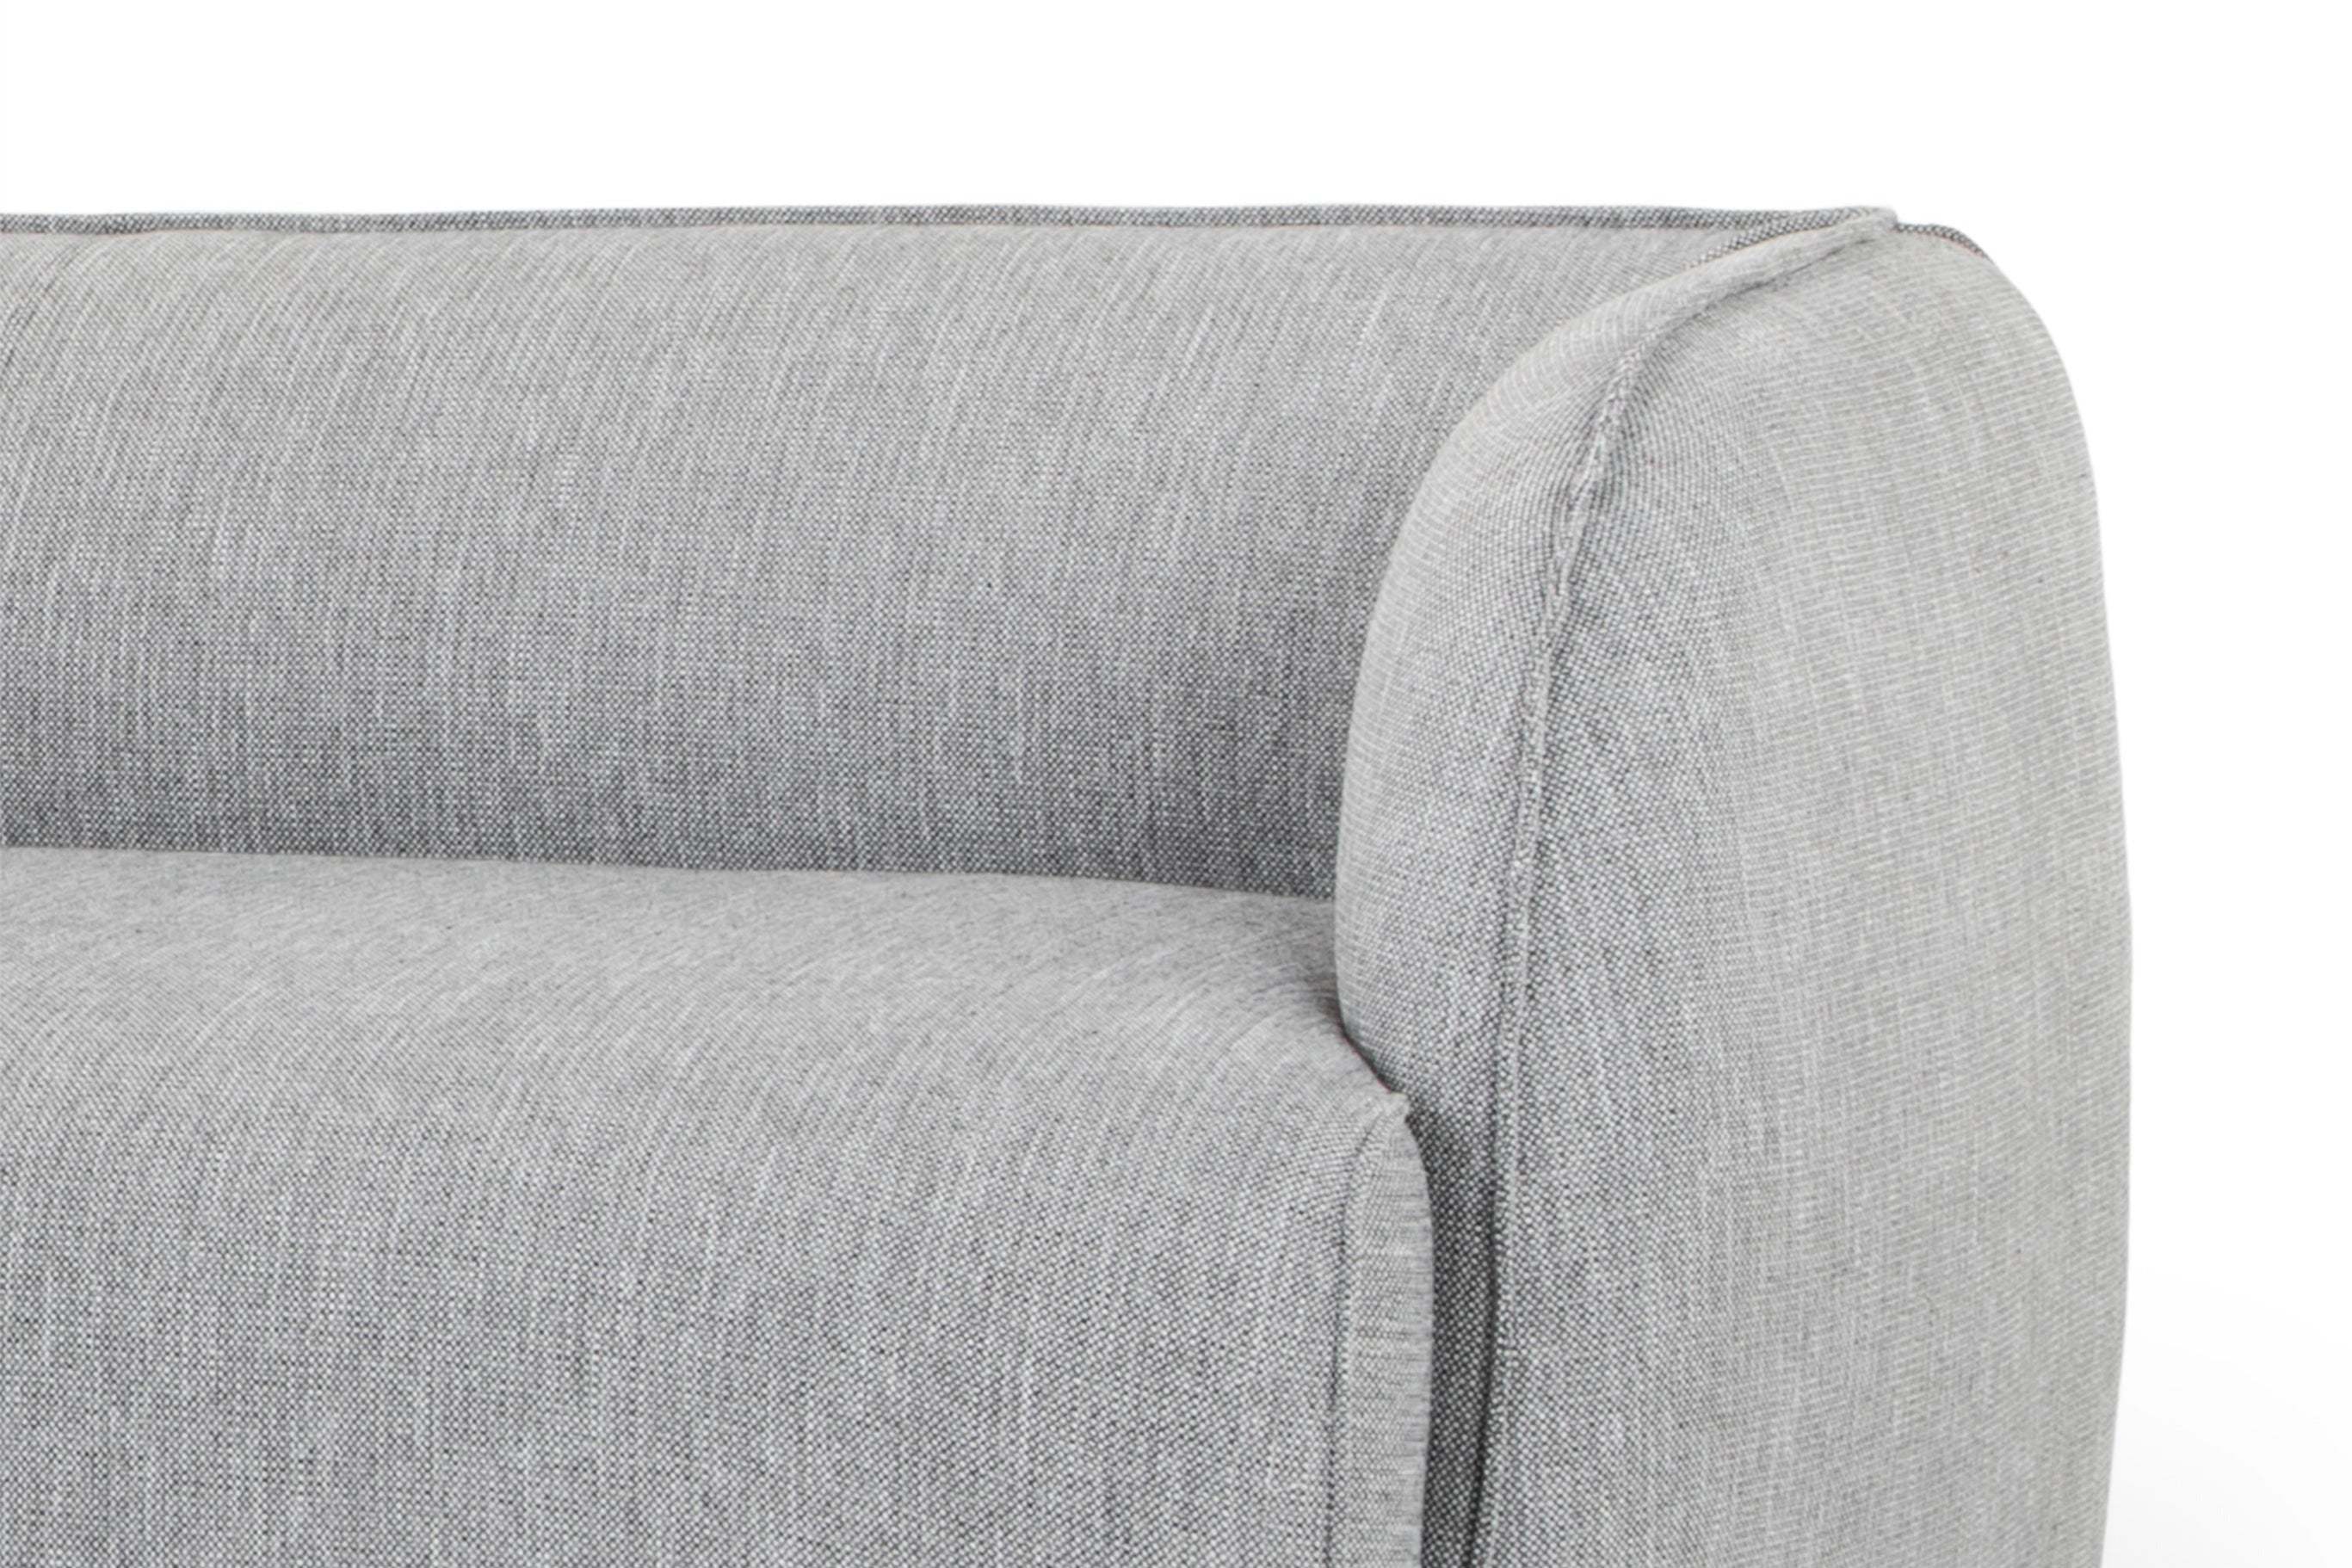 Troy 3 Seater Left Chaise Sofa - Graphite Grey